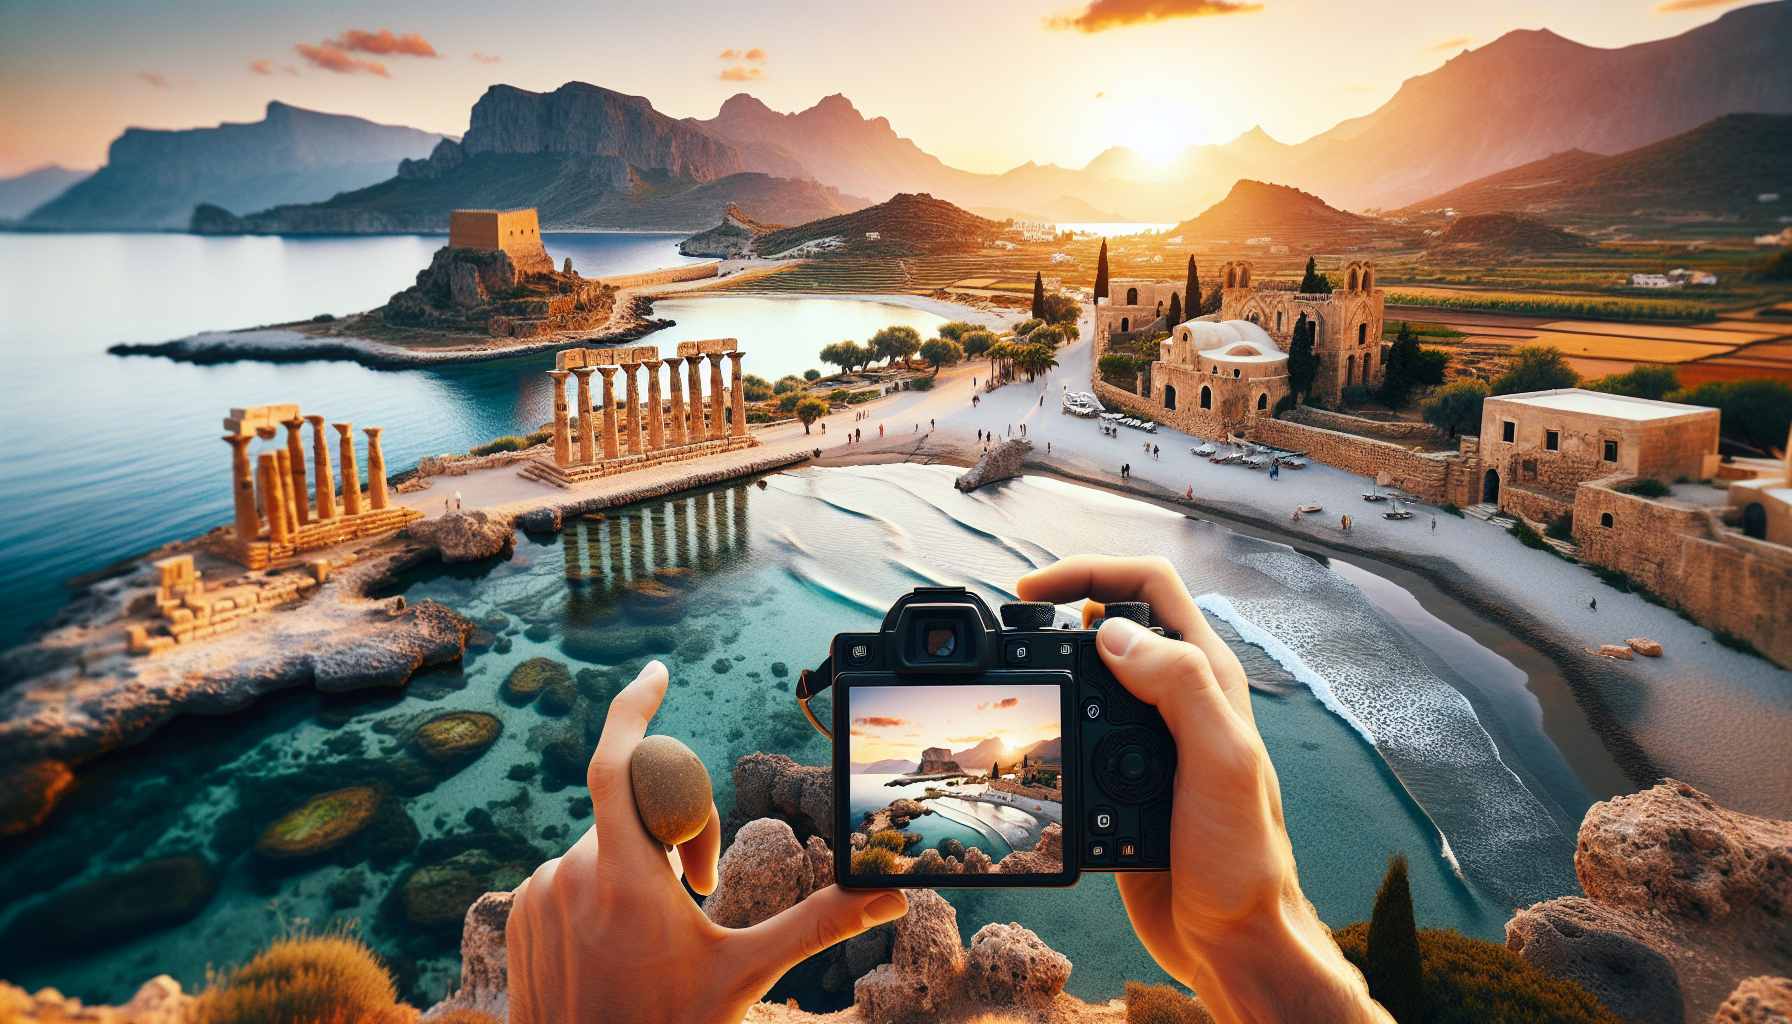 explore the best places to visit in europe and discover the rich history of crete, an island with a fascinating past and stunning landscapes.